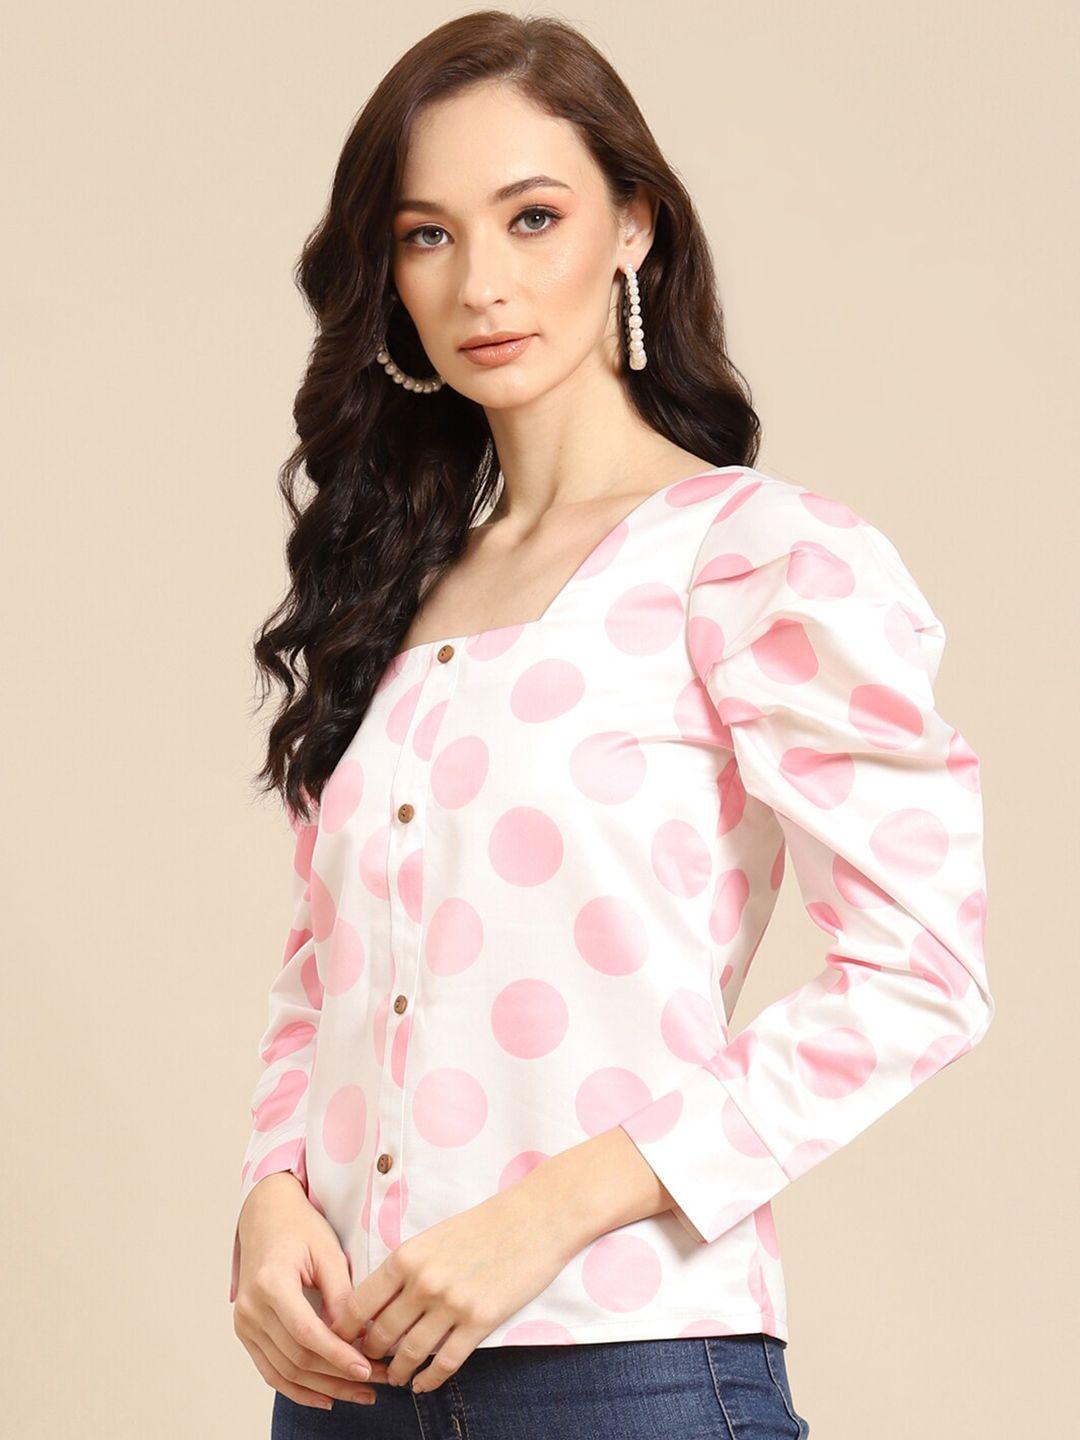 dodo & moa pink print georgette top